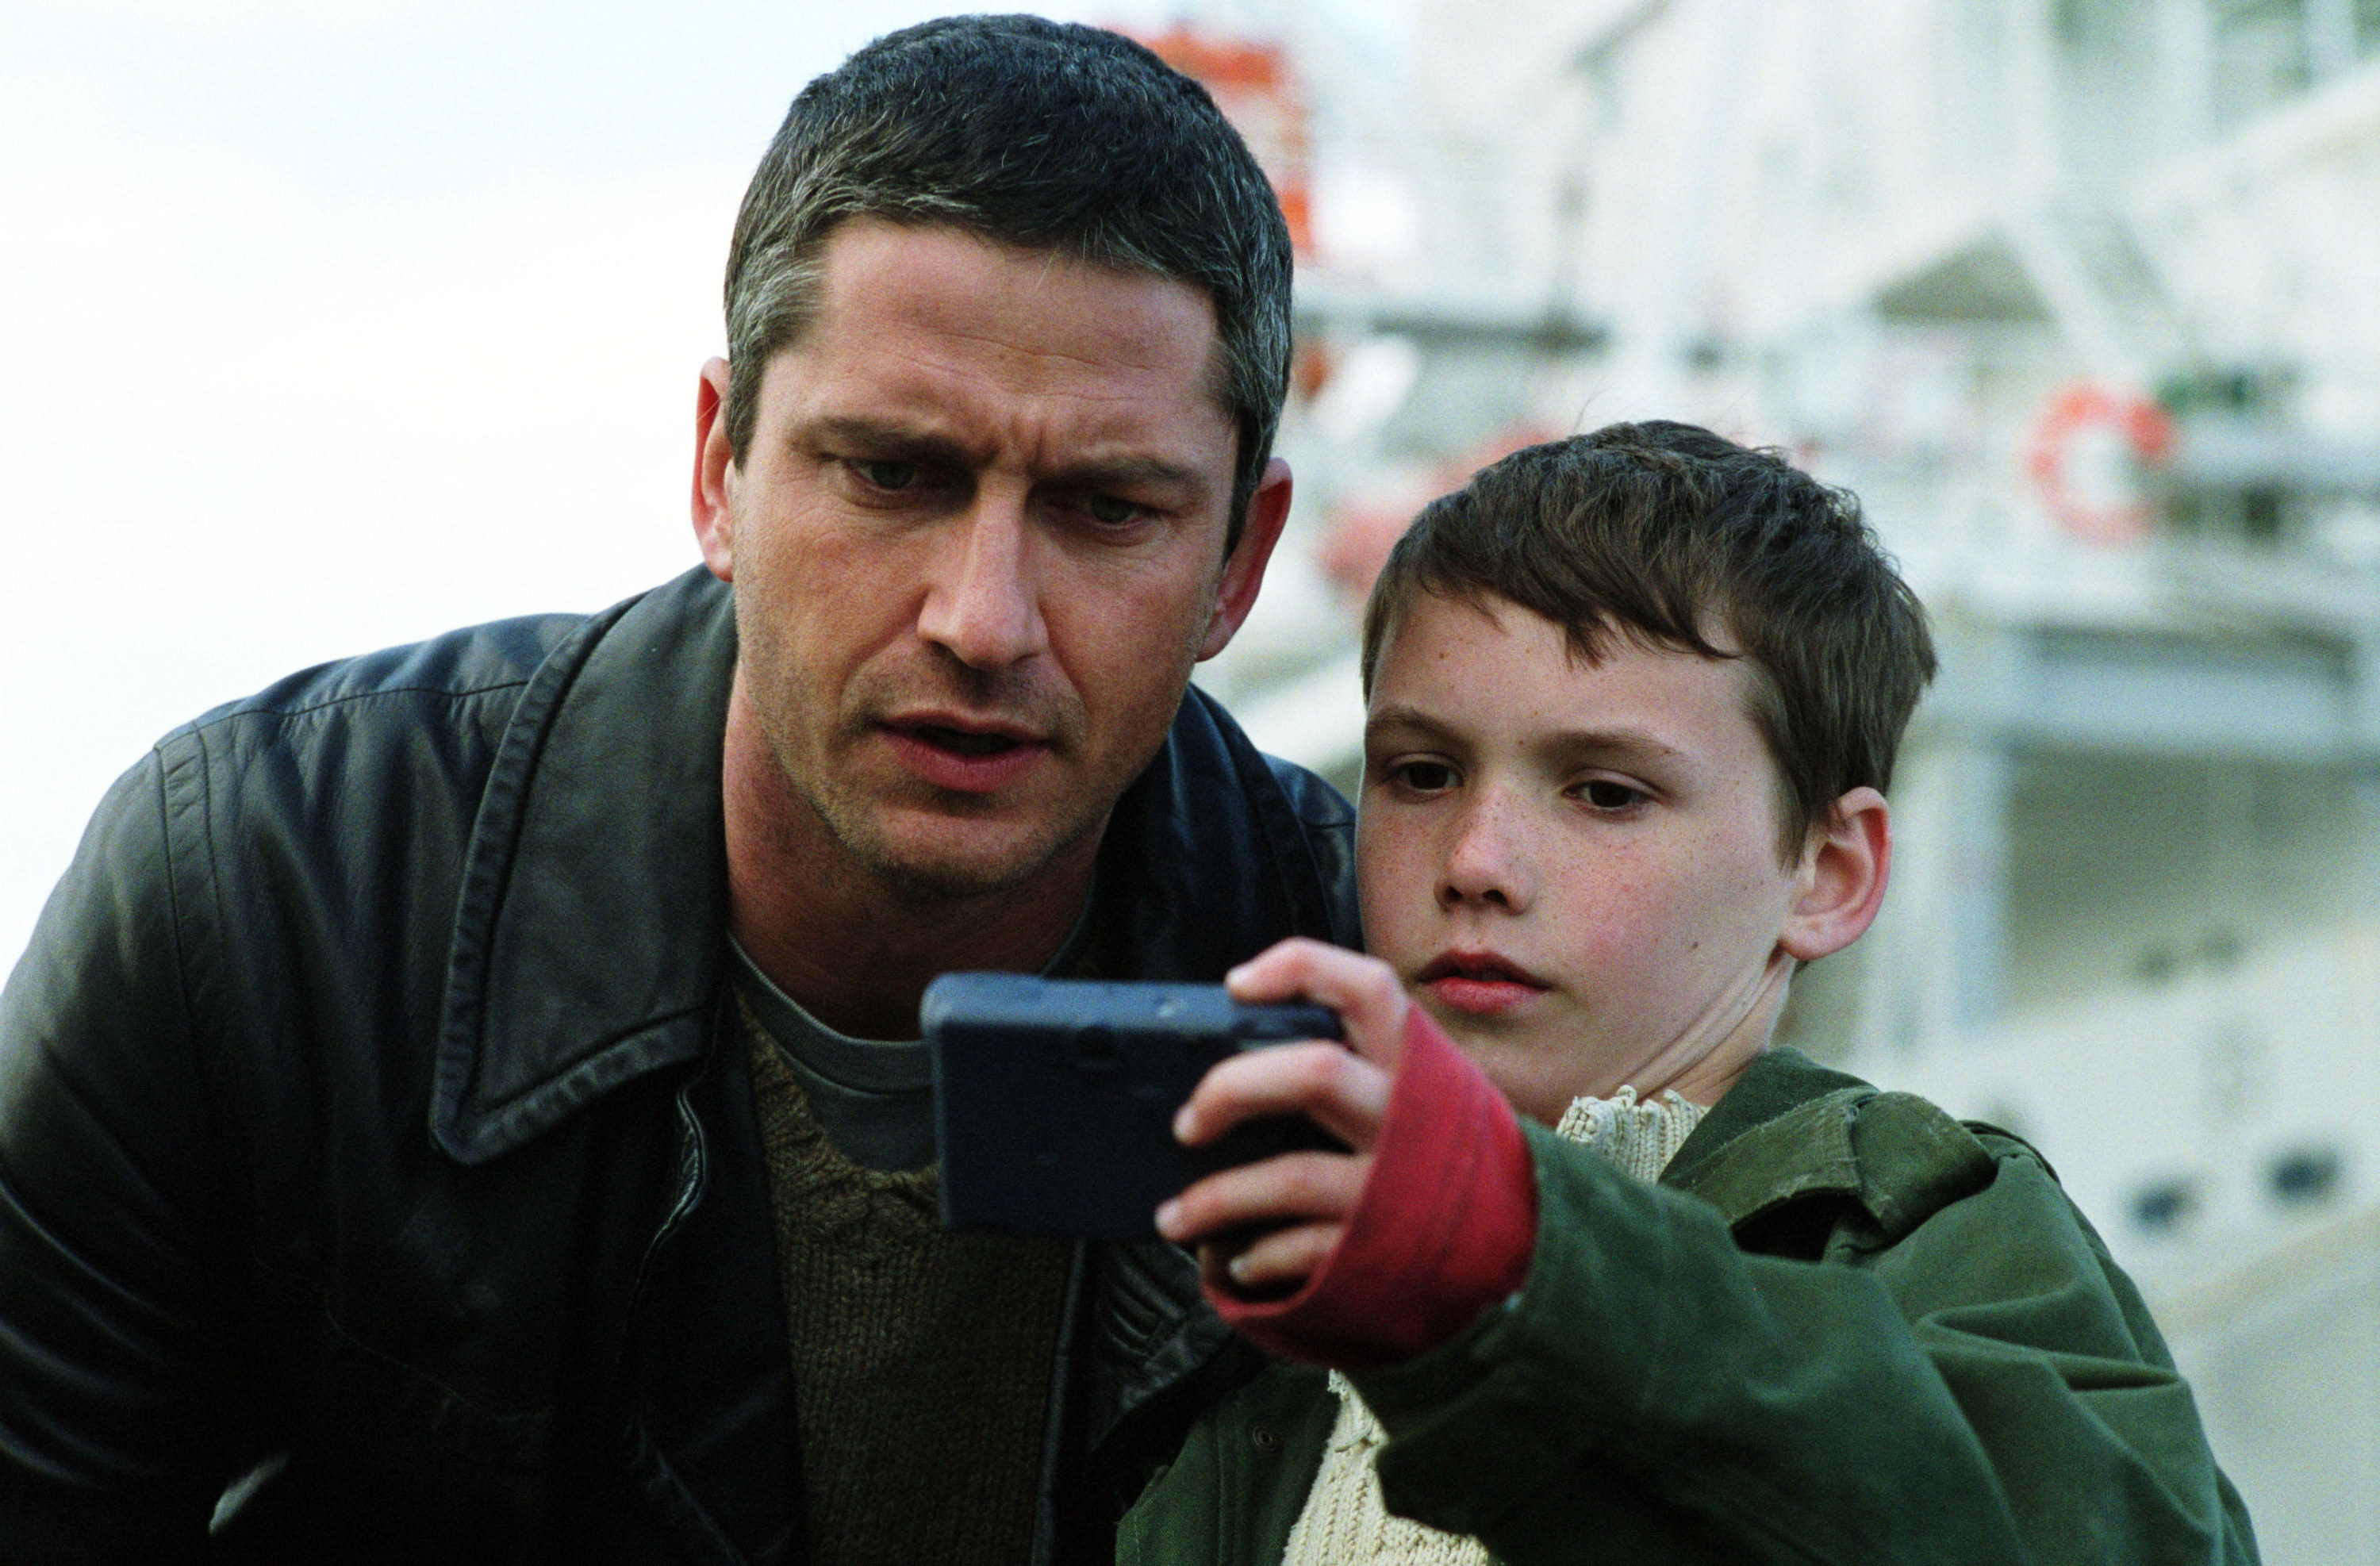 A man and a young boy stare intently in a digital camera